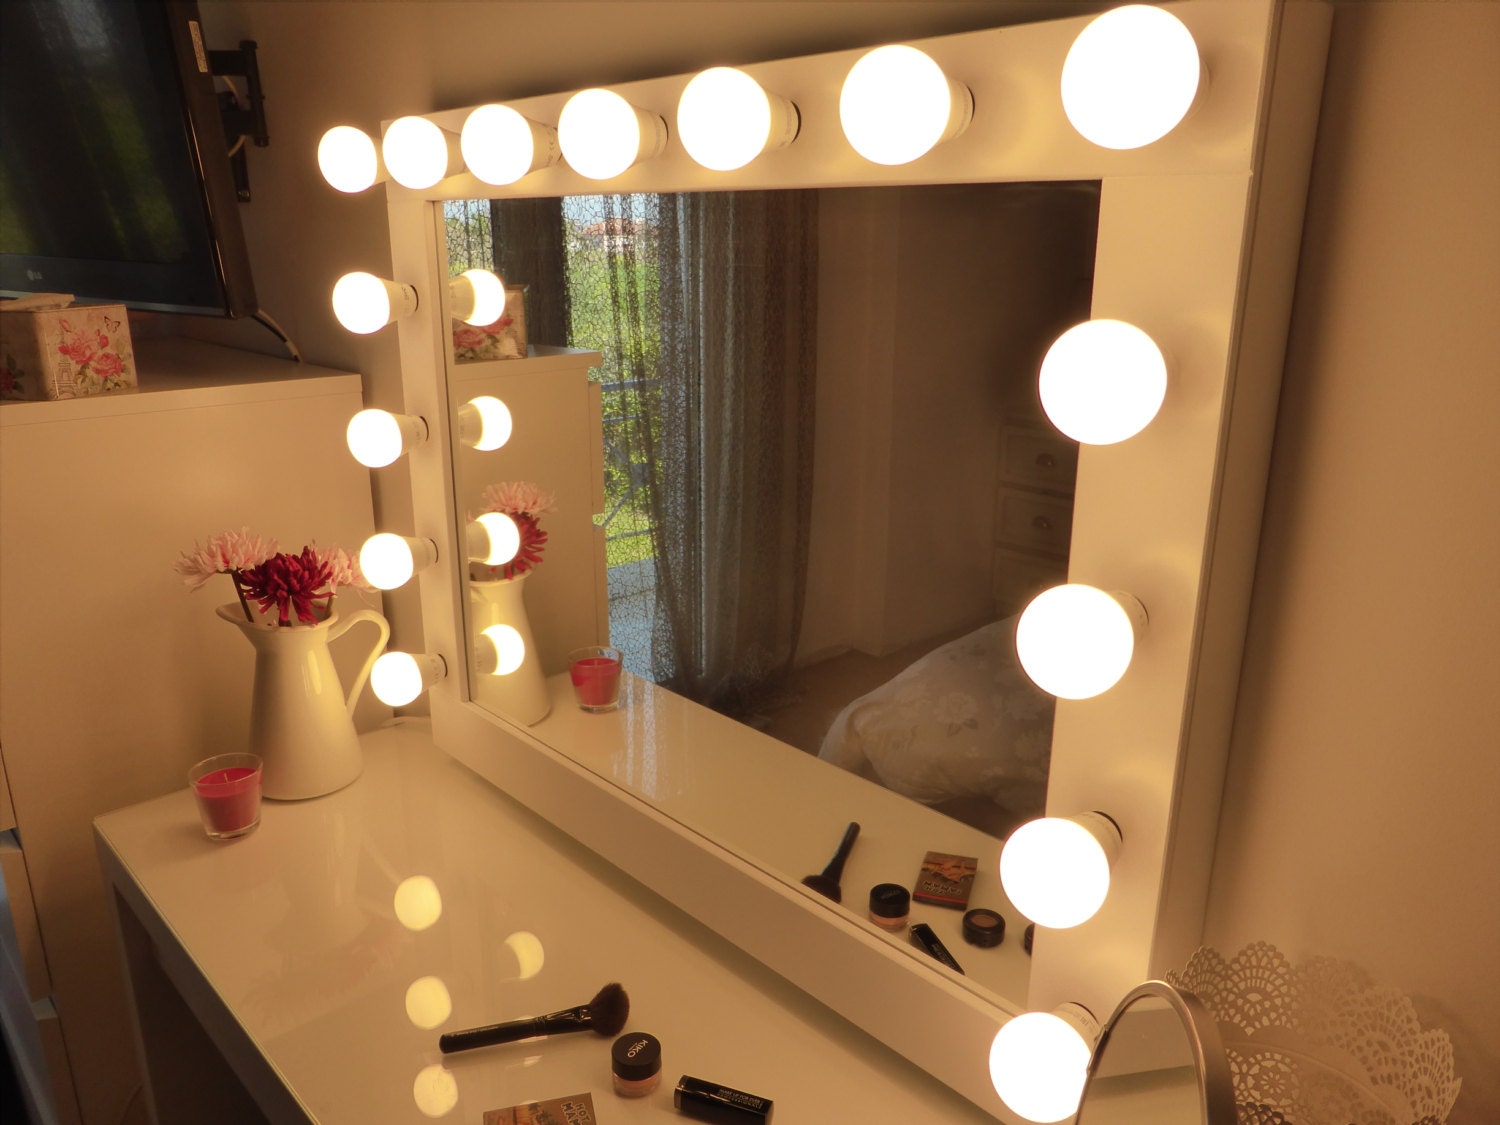 Hollywood lighted vanity mirror-large makeup mirror with